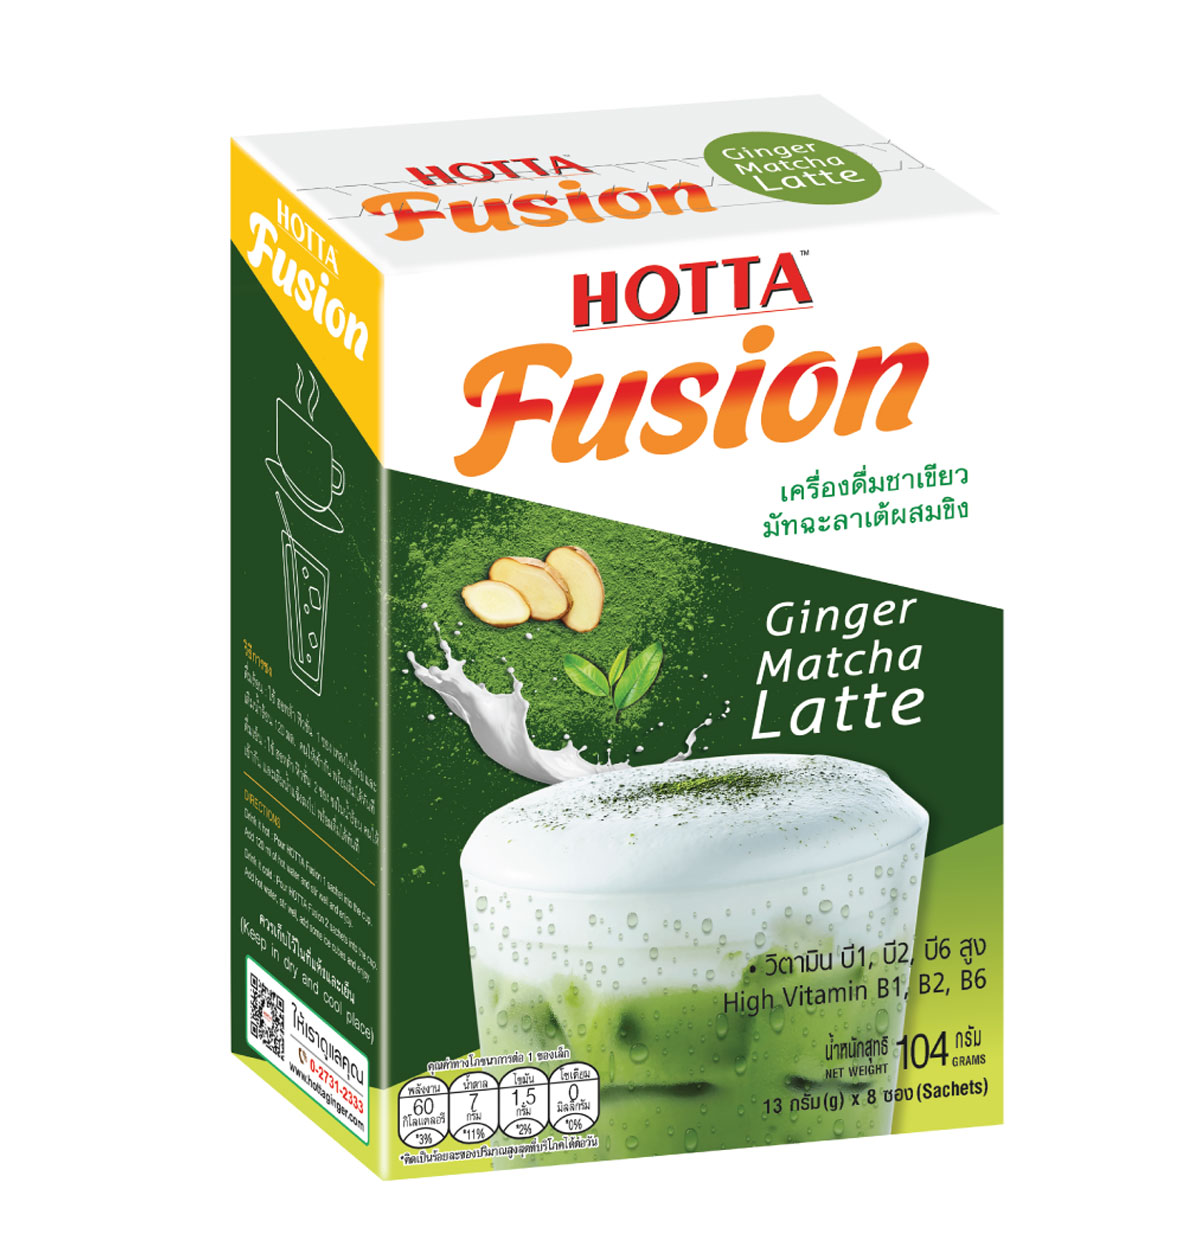 HOTTA Fusion Instant Matcha Green Tea with Ginger Latte Drink 13g.x 8 Sachets